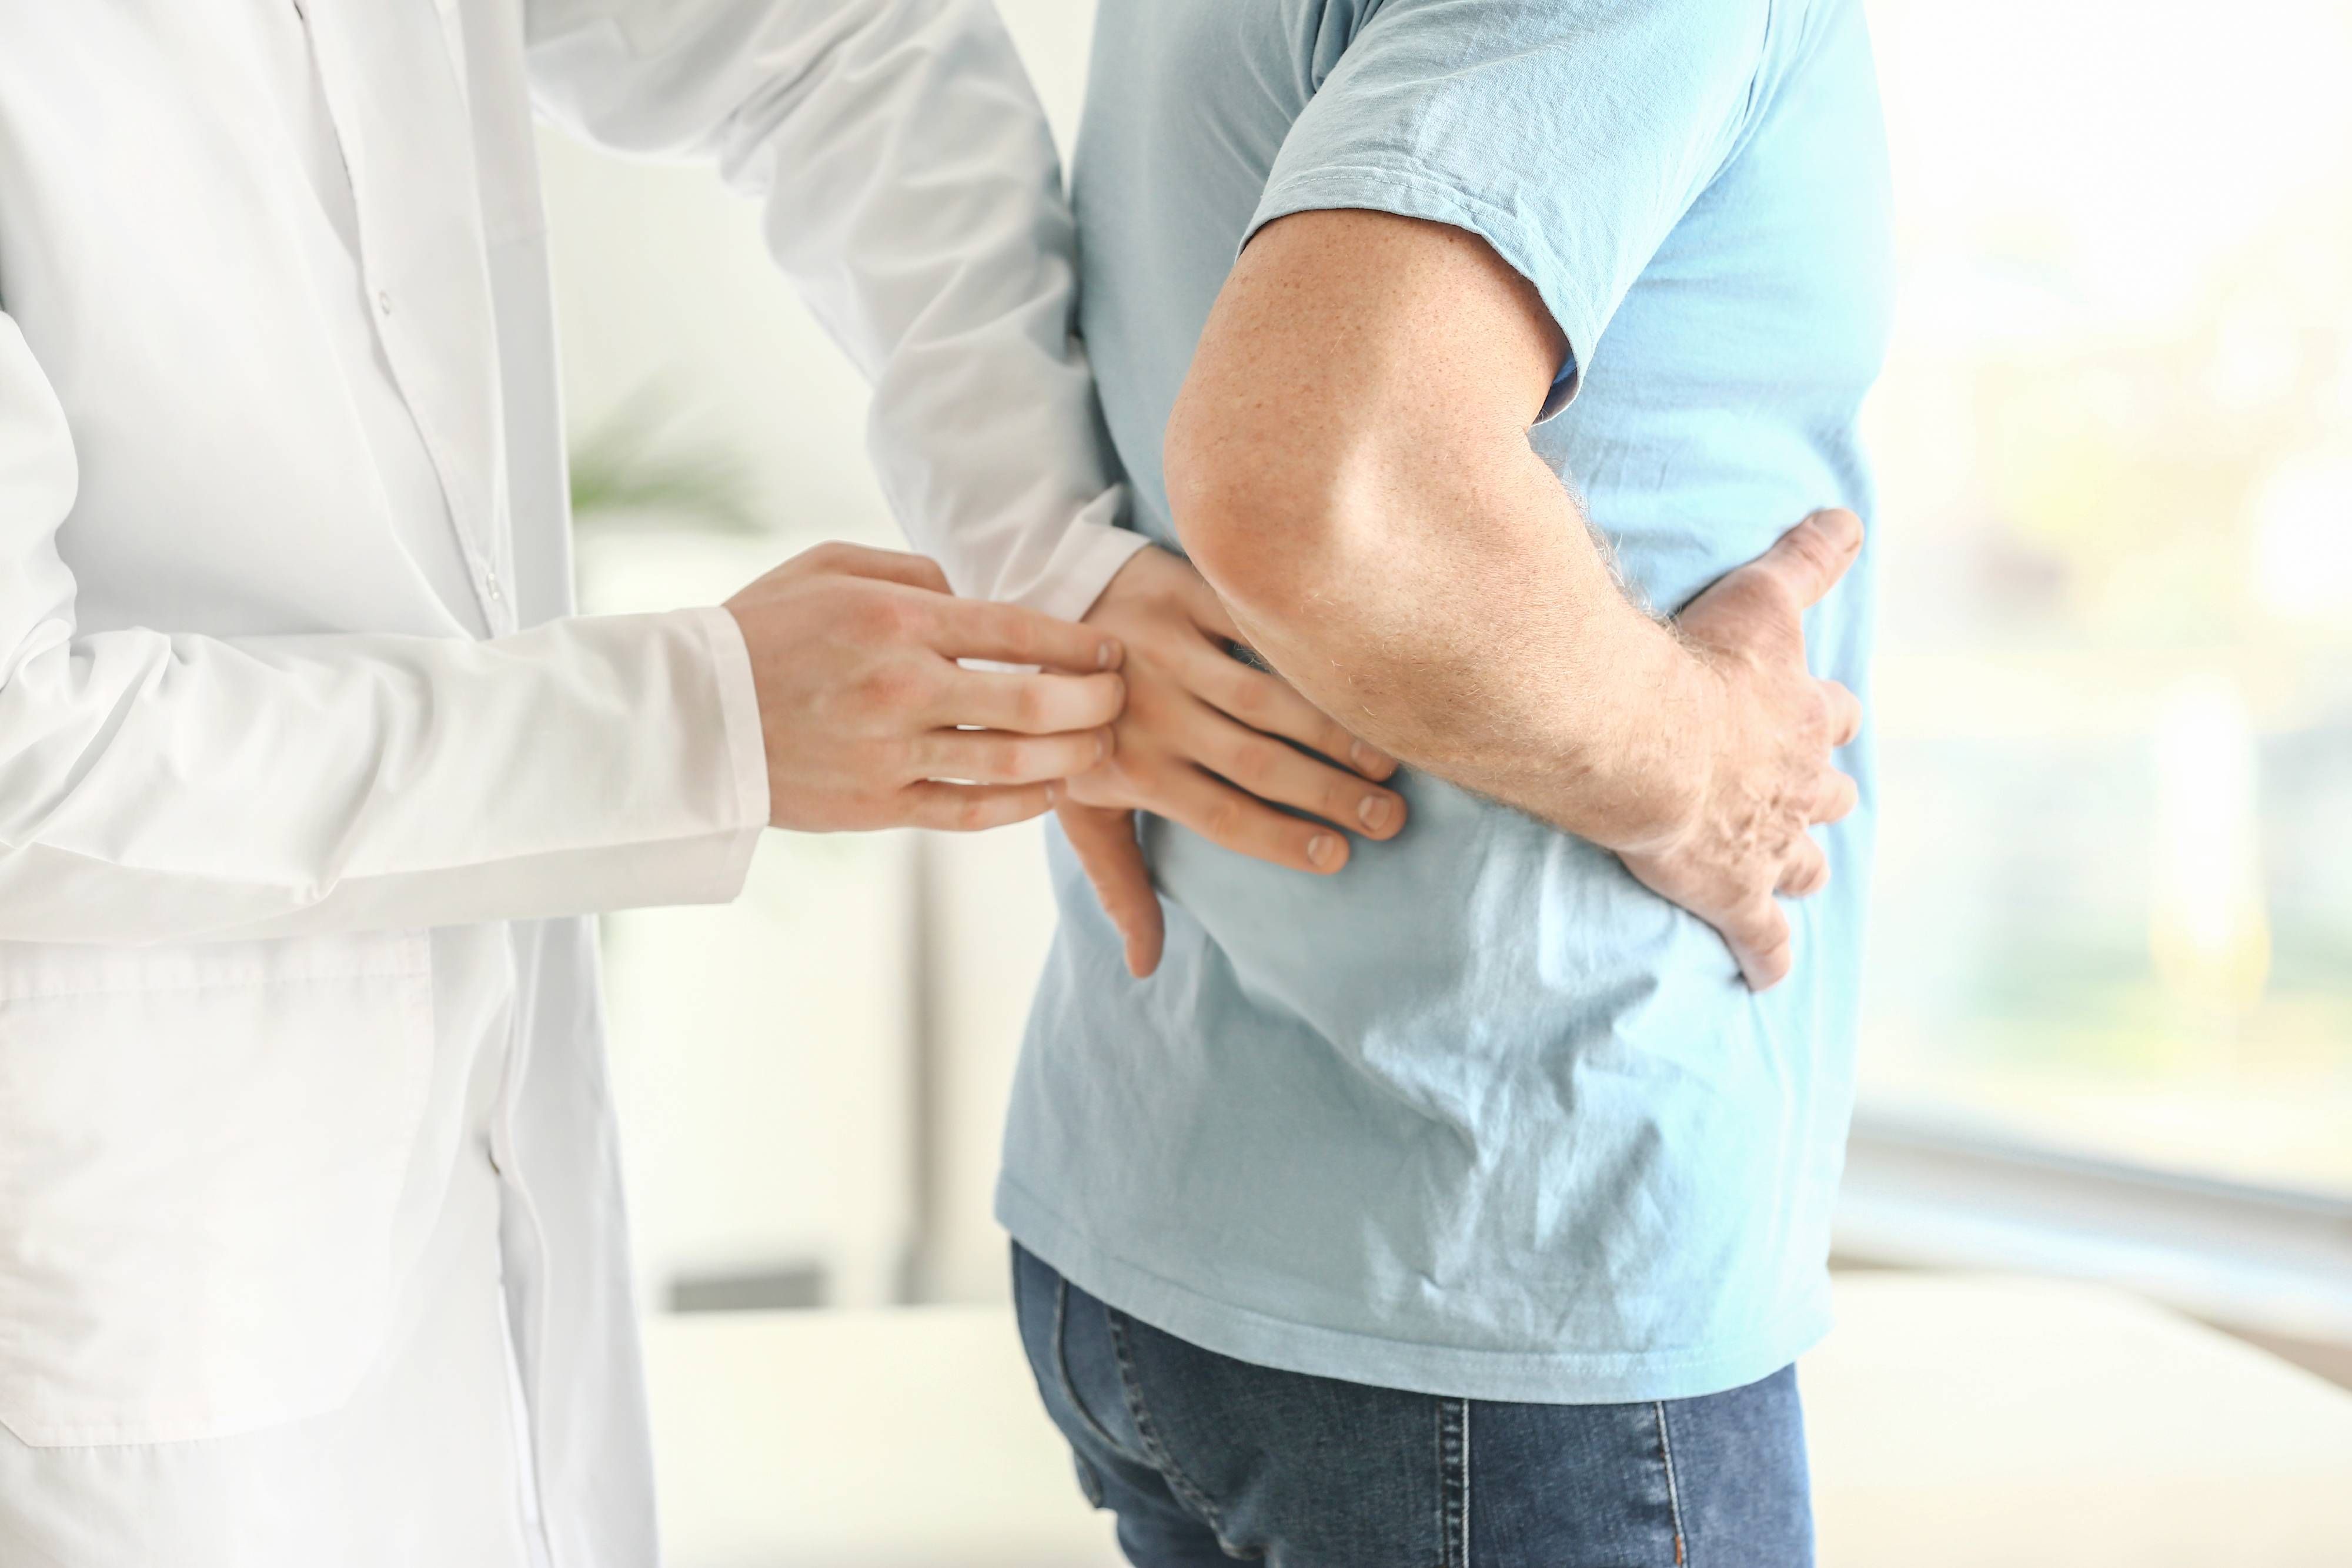 Relieving Back Pain with Chiropractic Care